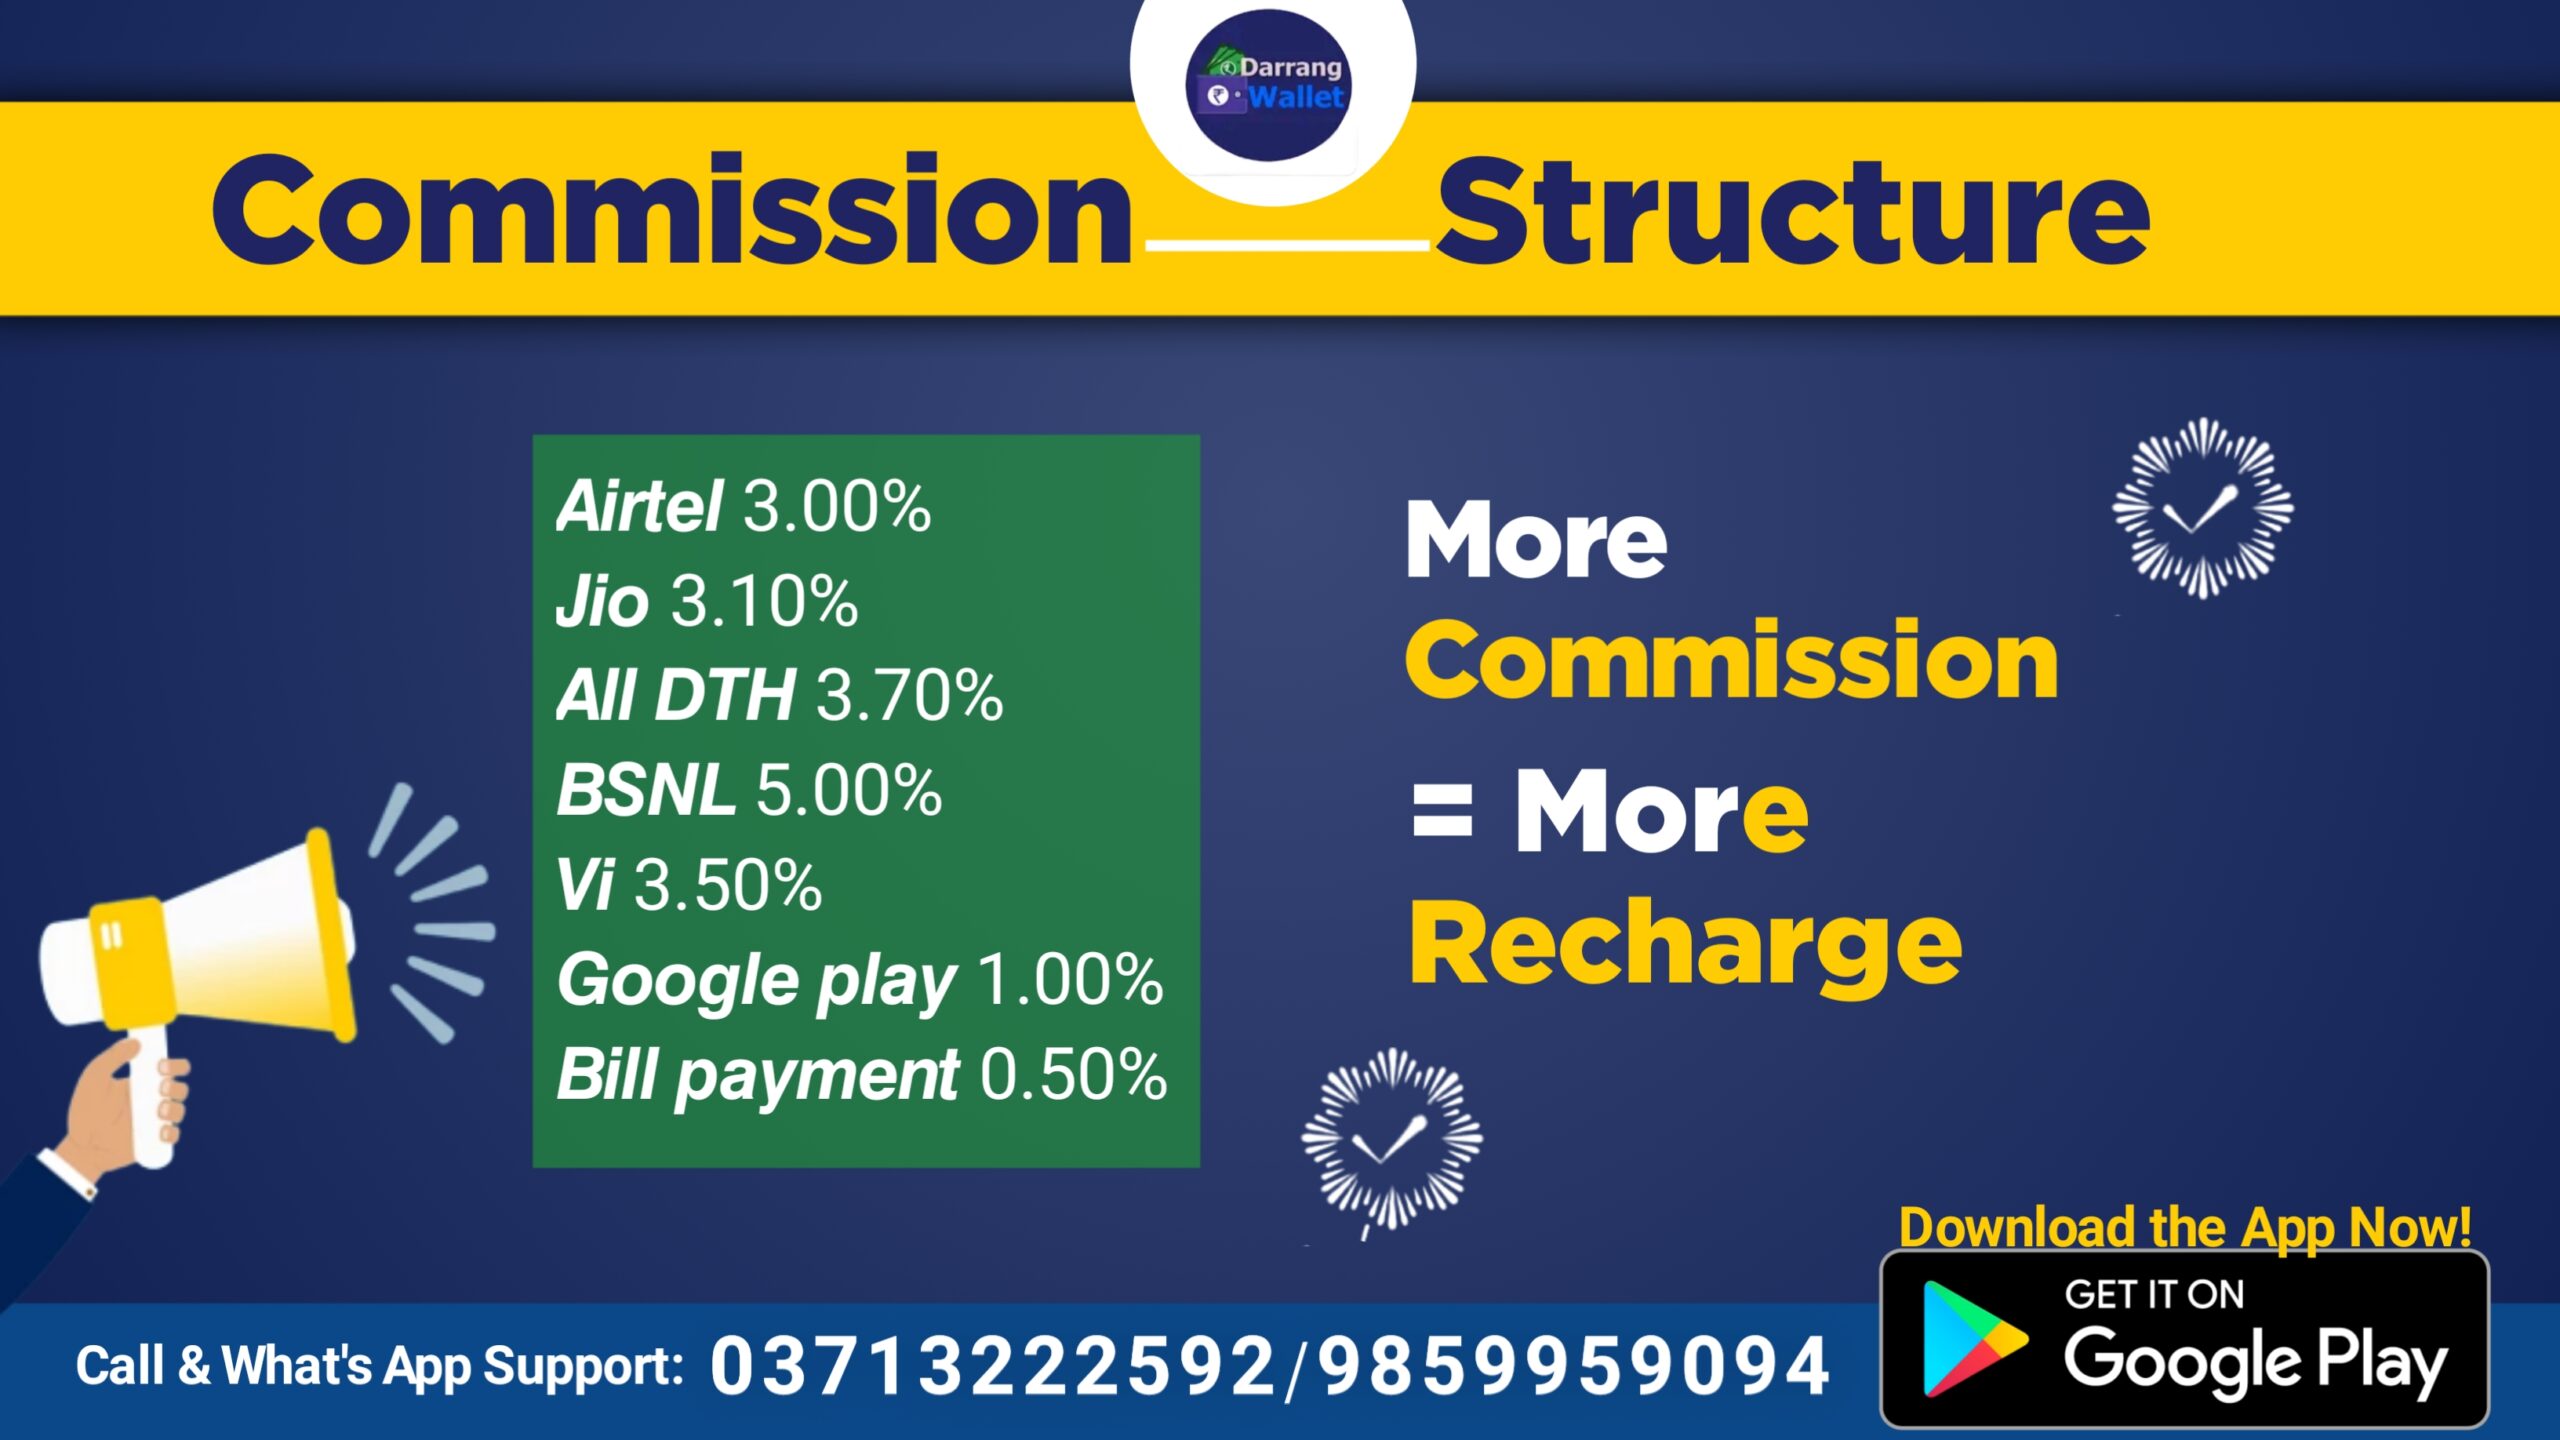 Darrang Wallet Recharge APP with best Commission